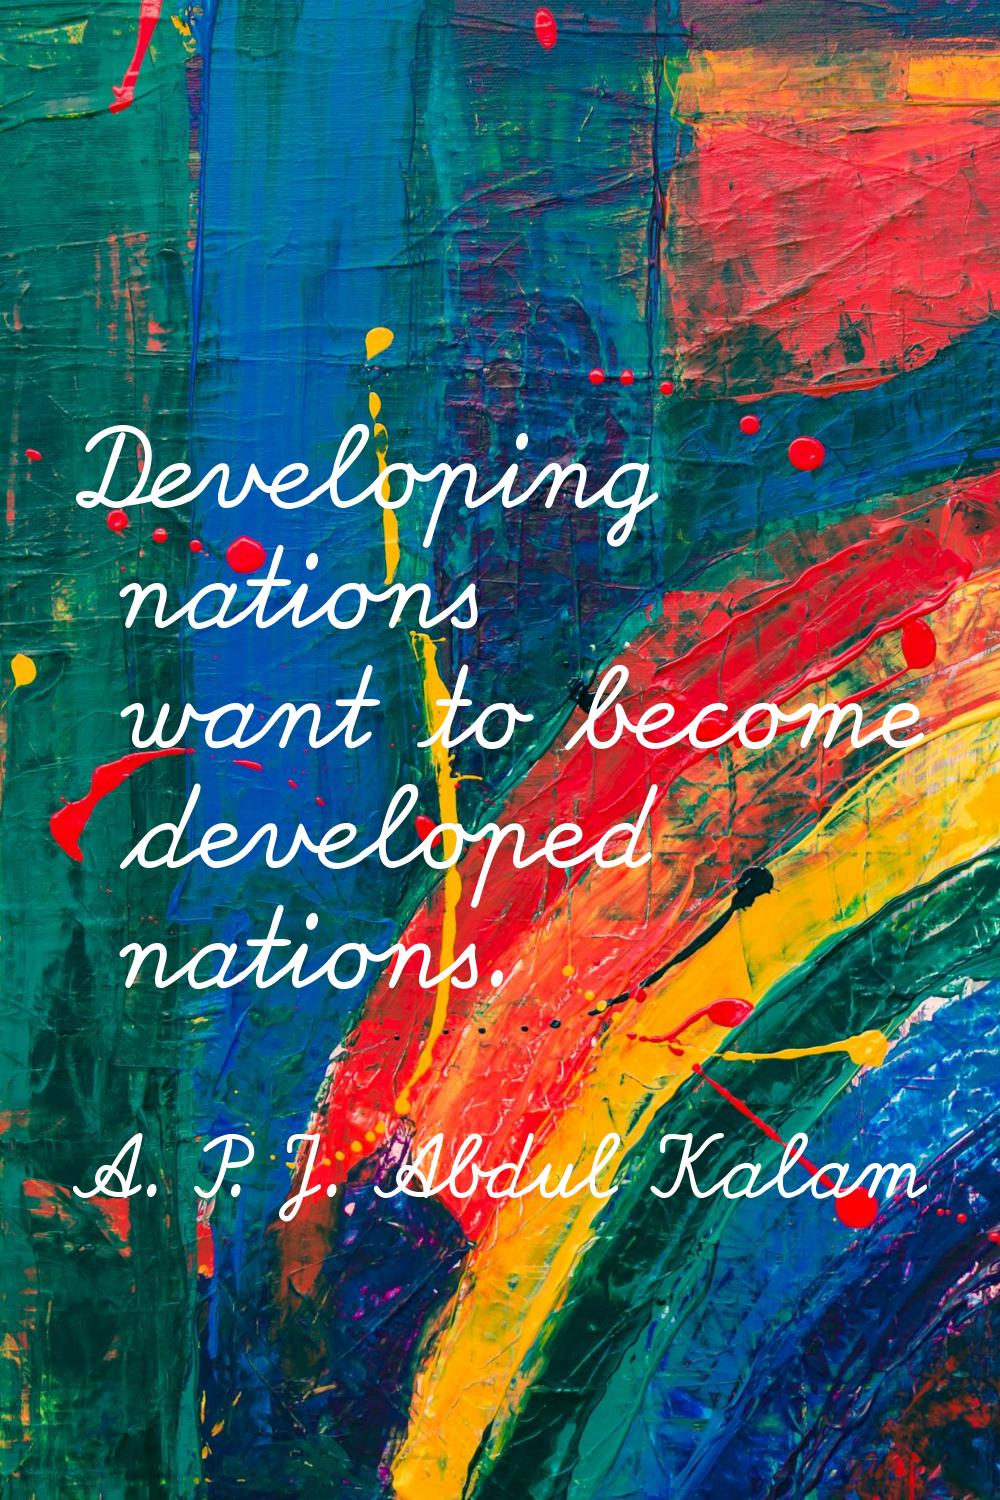 Developing nations want to become developed nations.